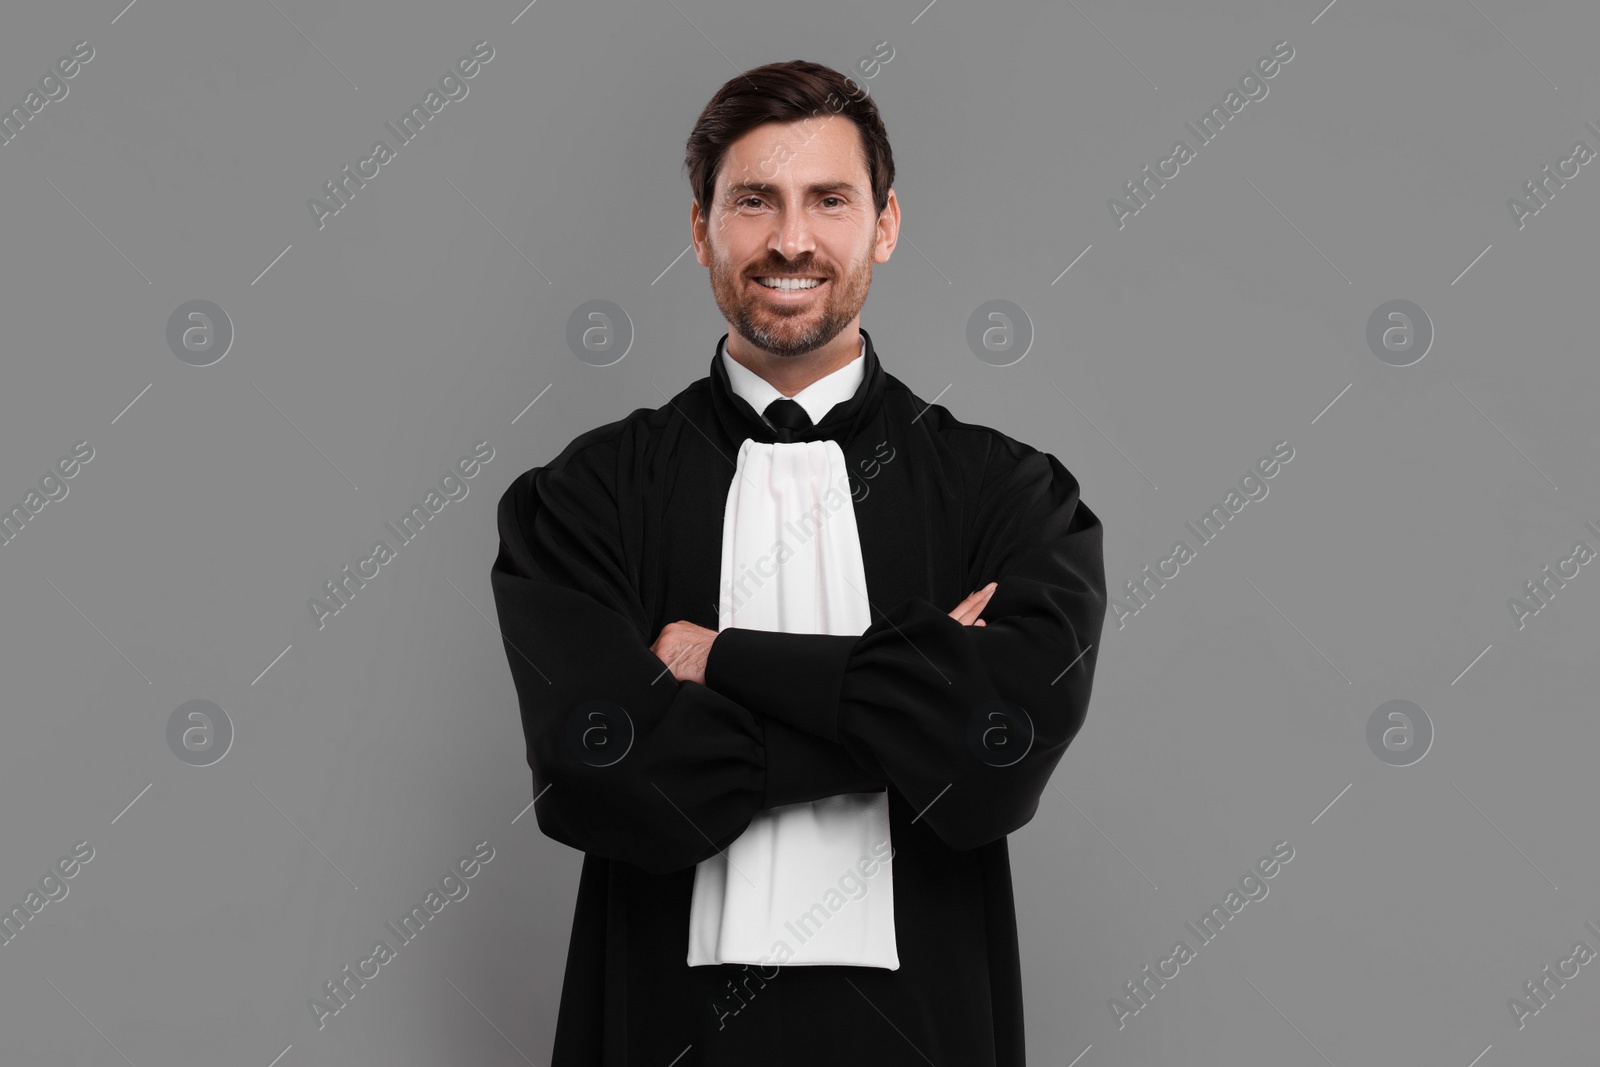 Photo of Smiling judge with crossed arms on grey background